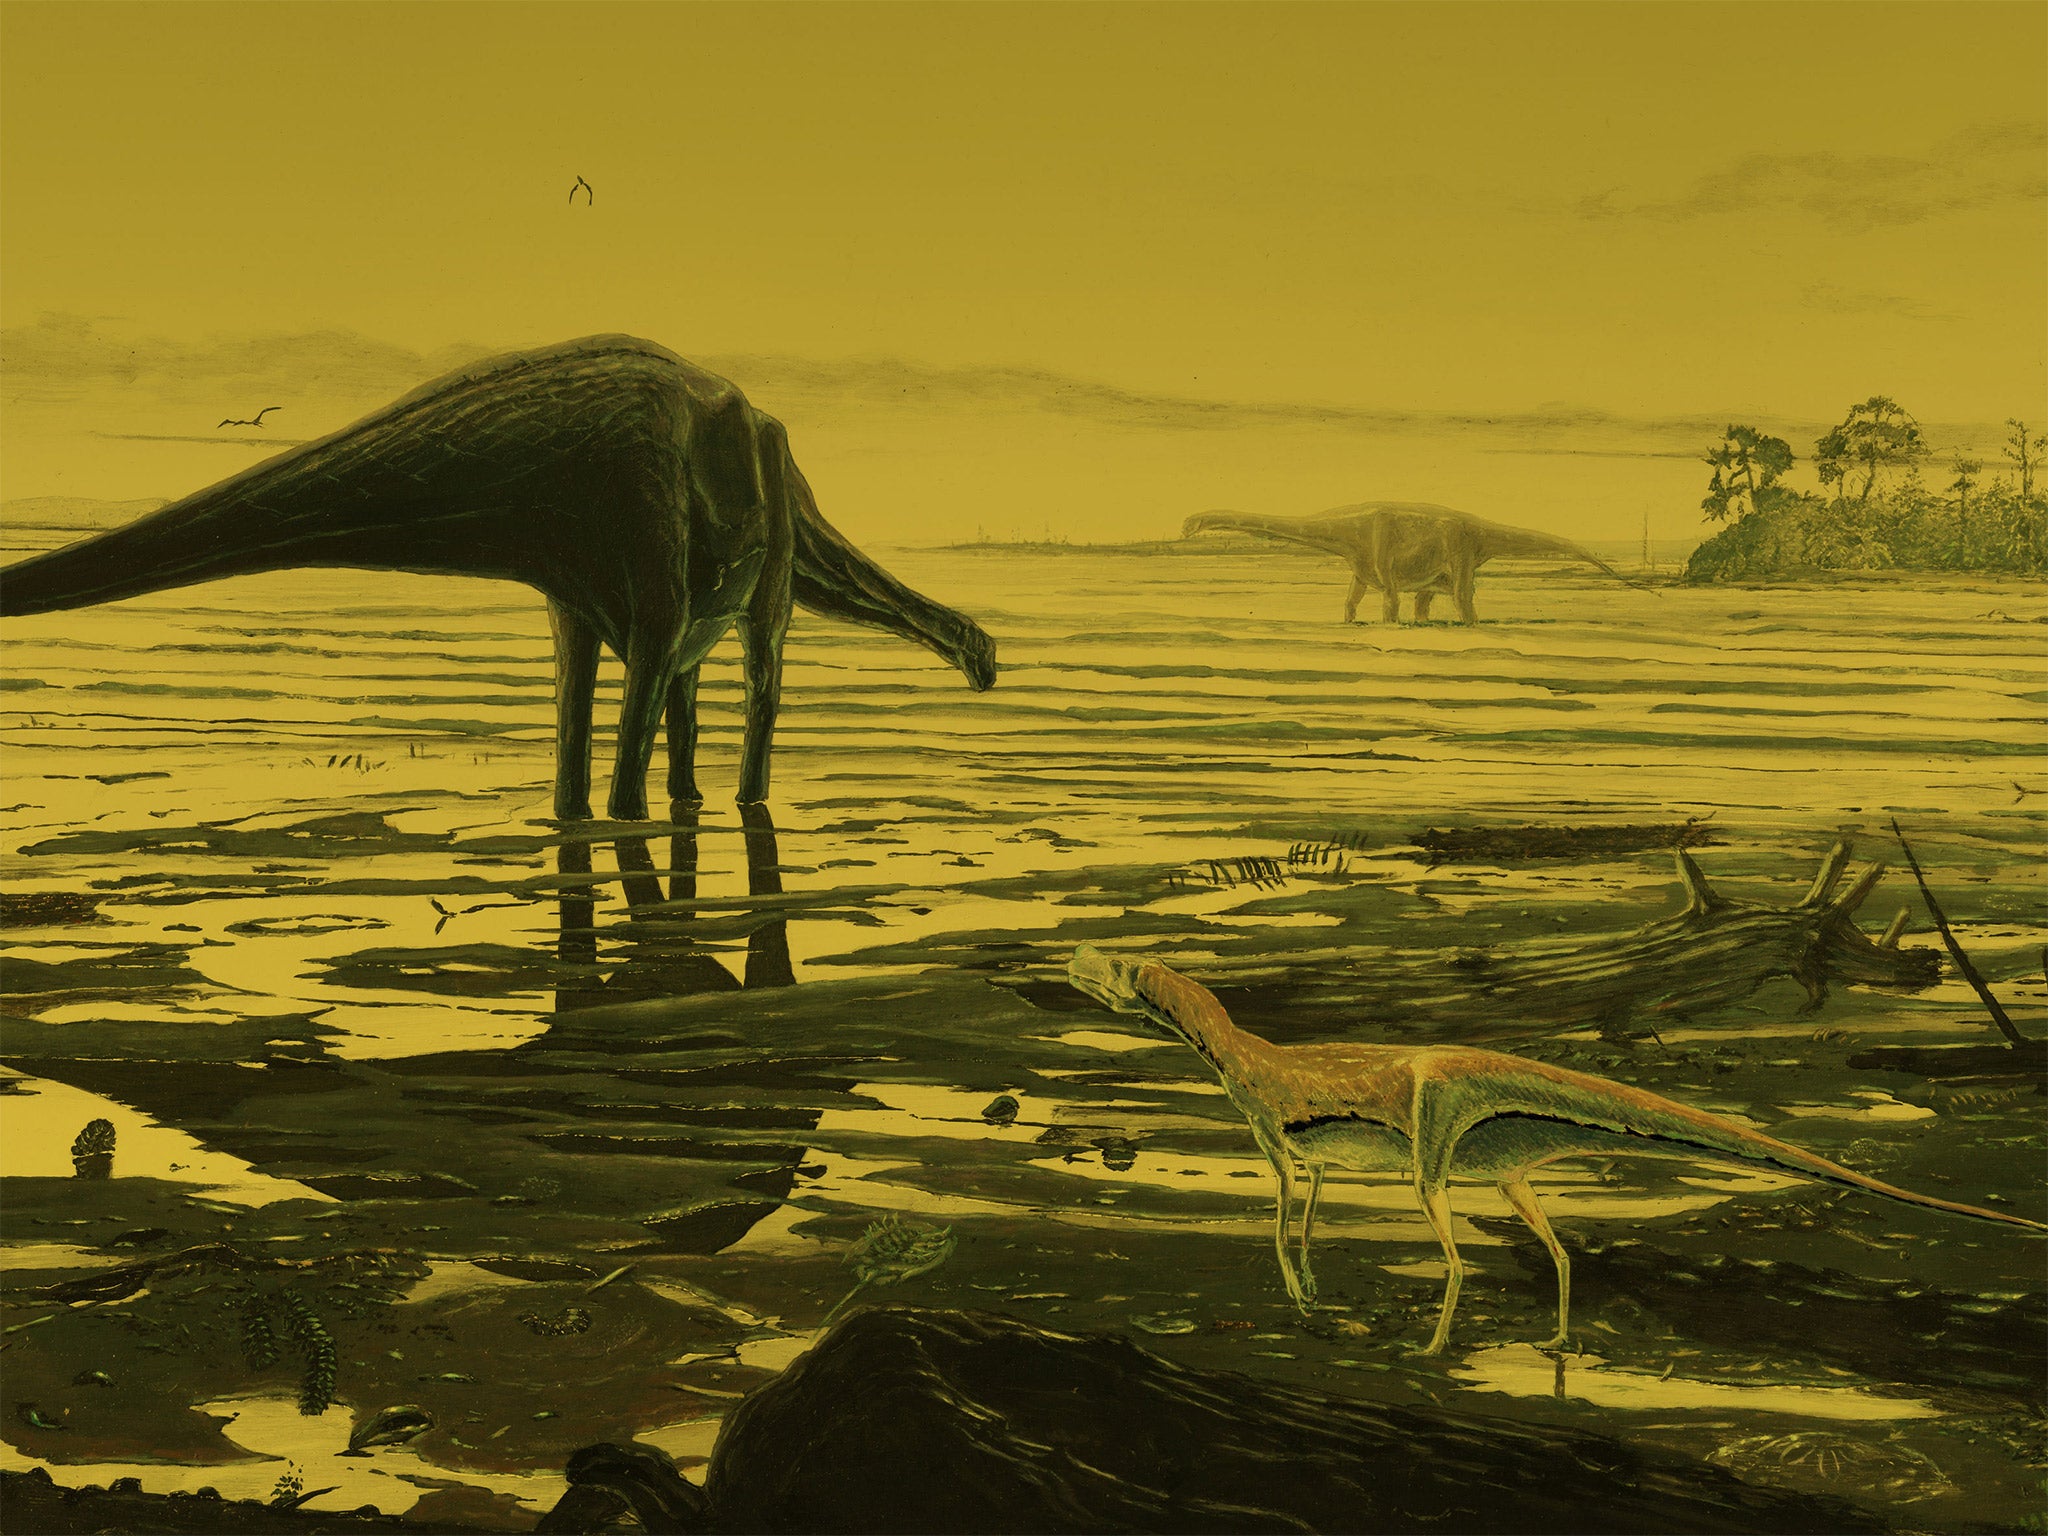 An artist's impression of Sauropod dinosaurs on the Isle of Skye